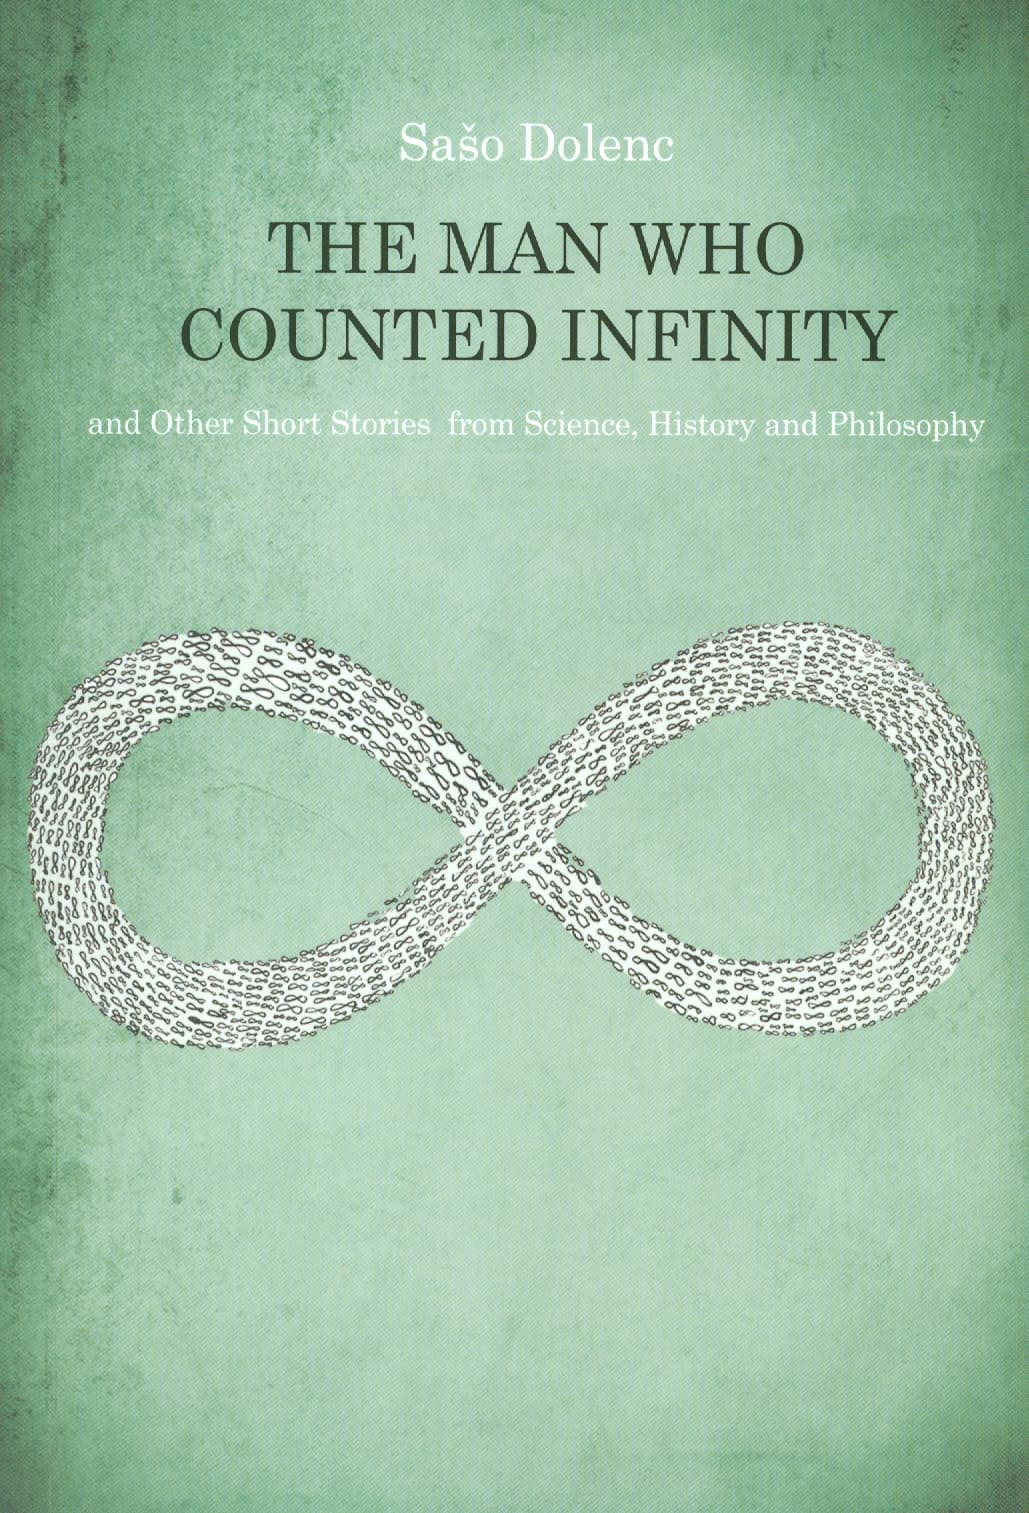 The Man Who Counted Infinity